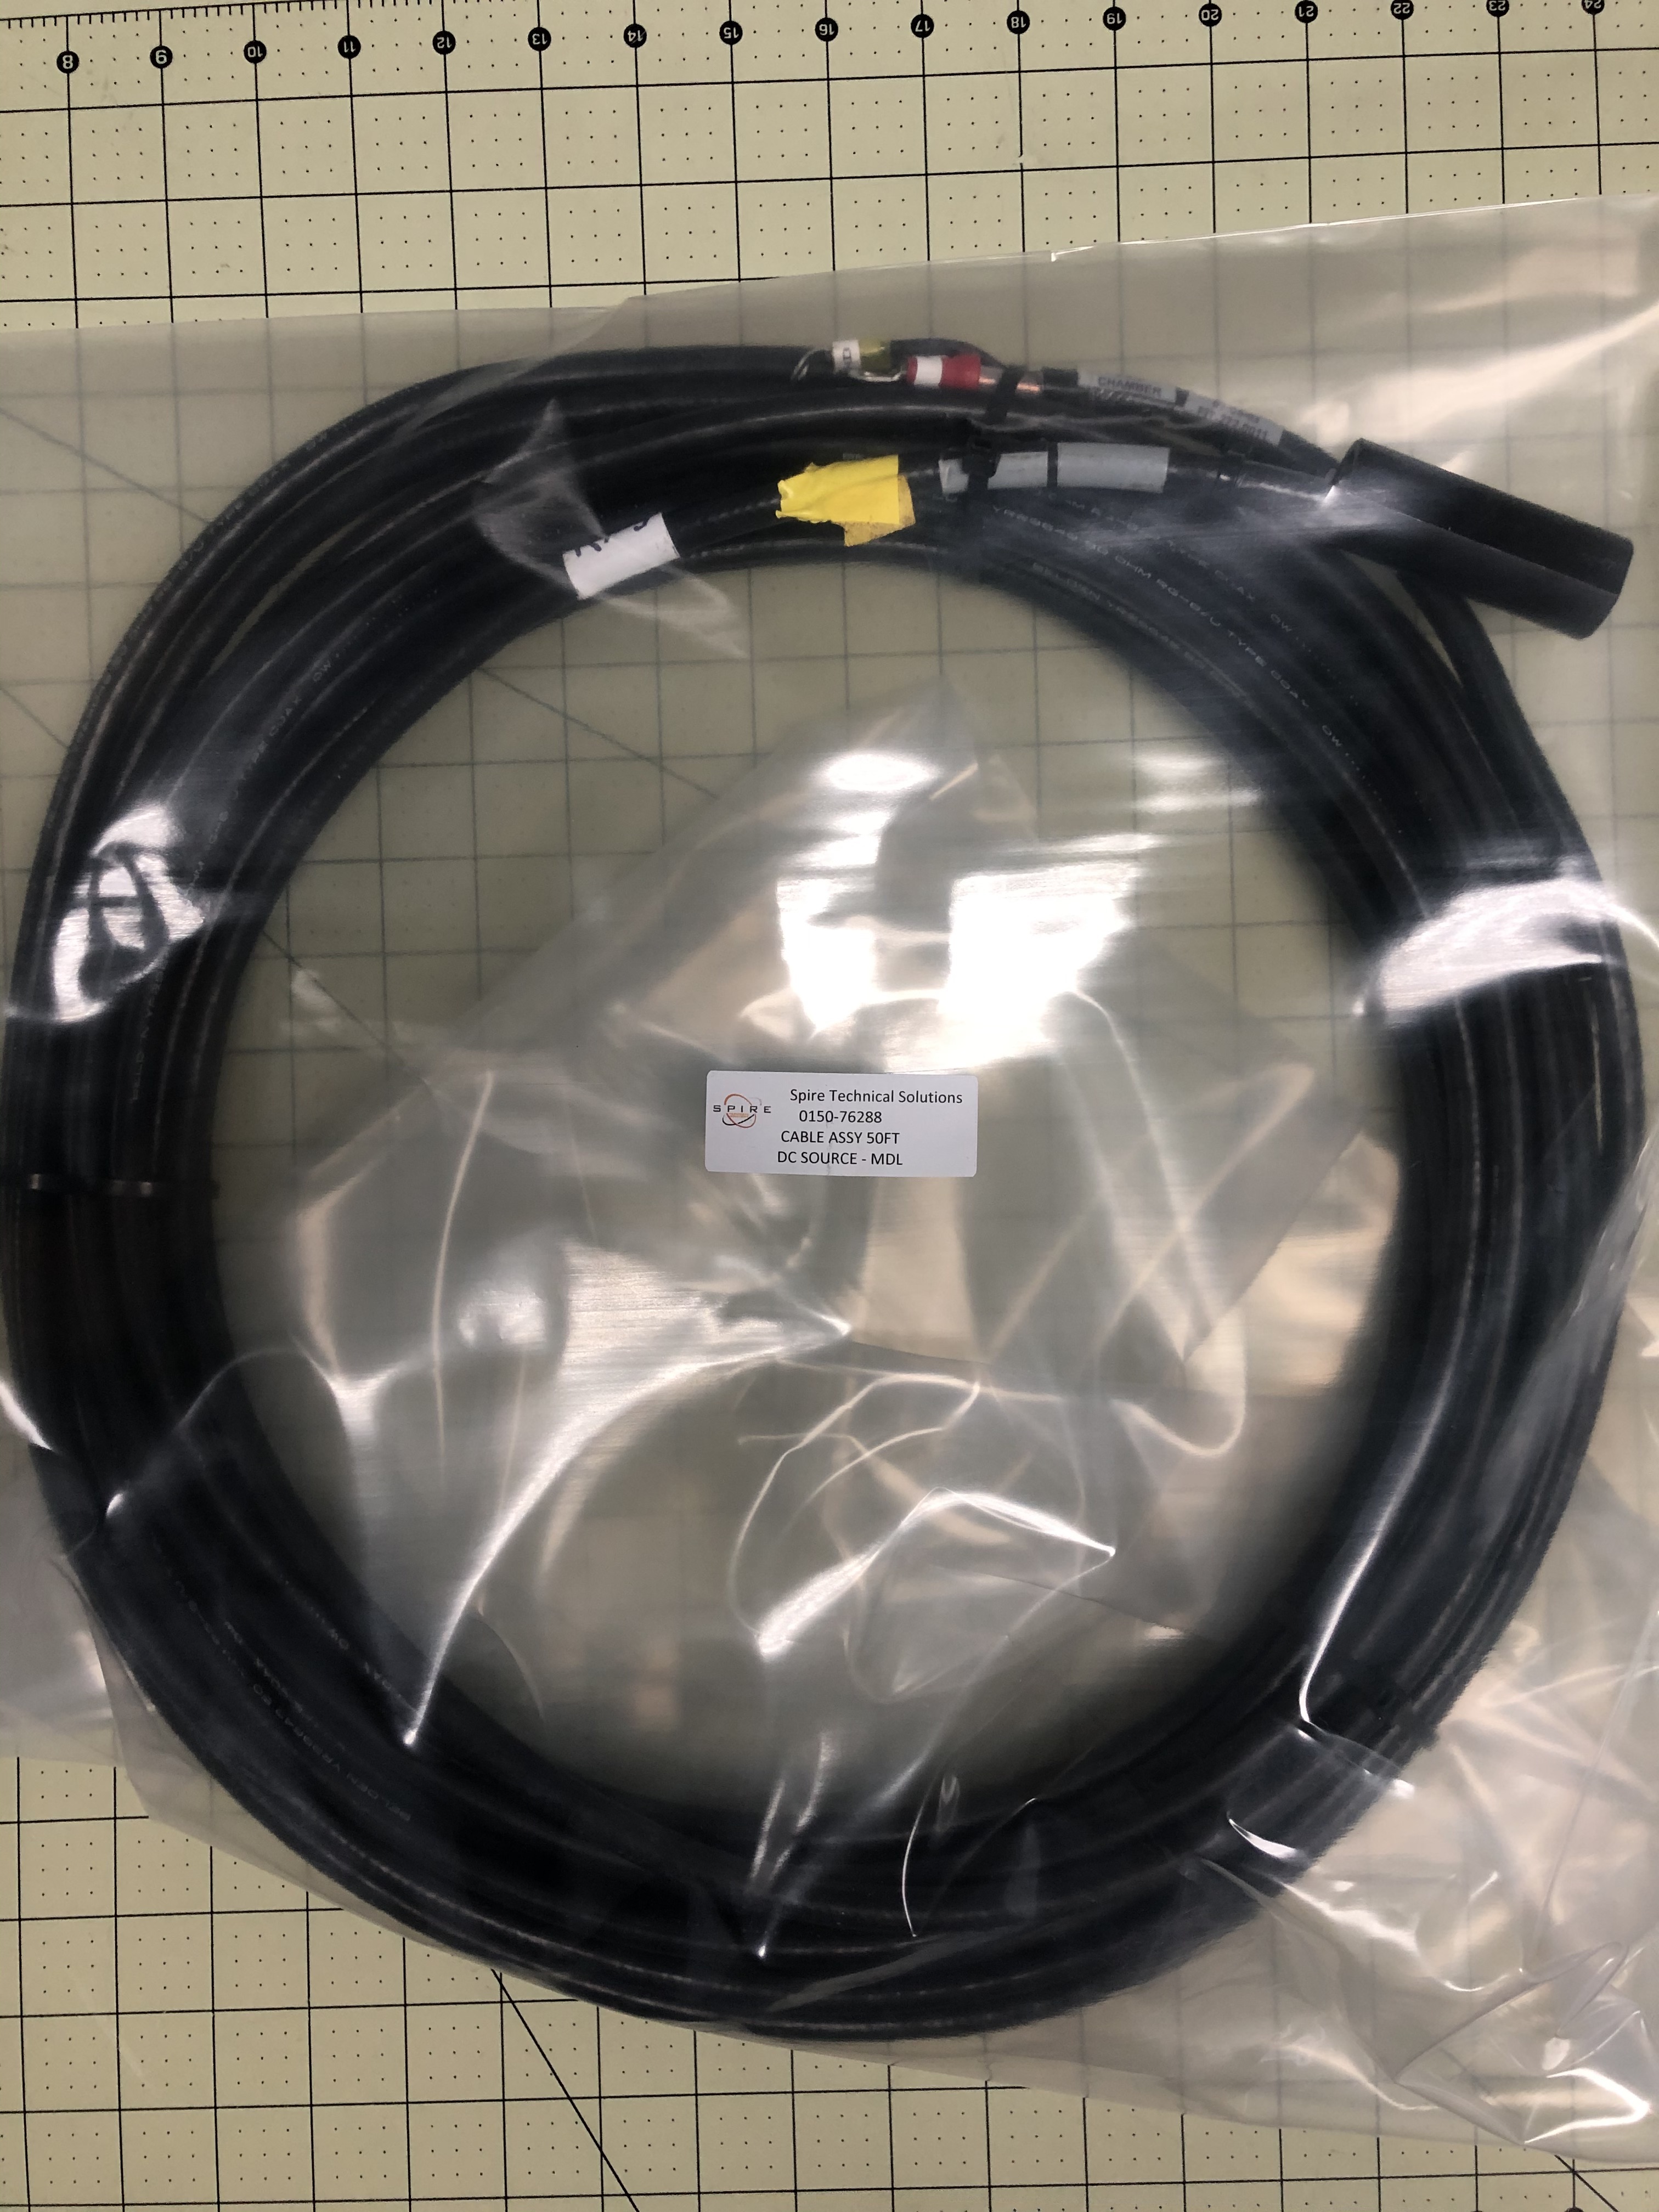 Cable Assy 50ft DC Source-MDL